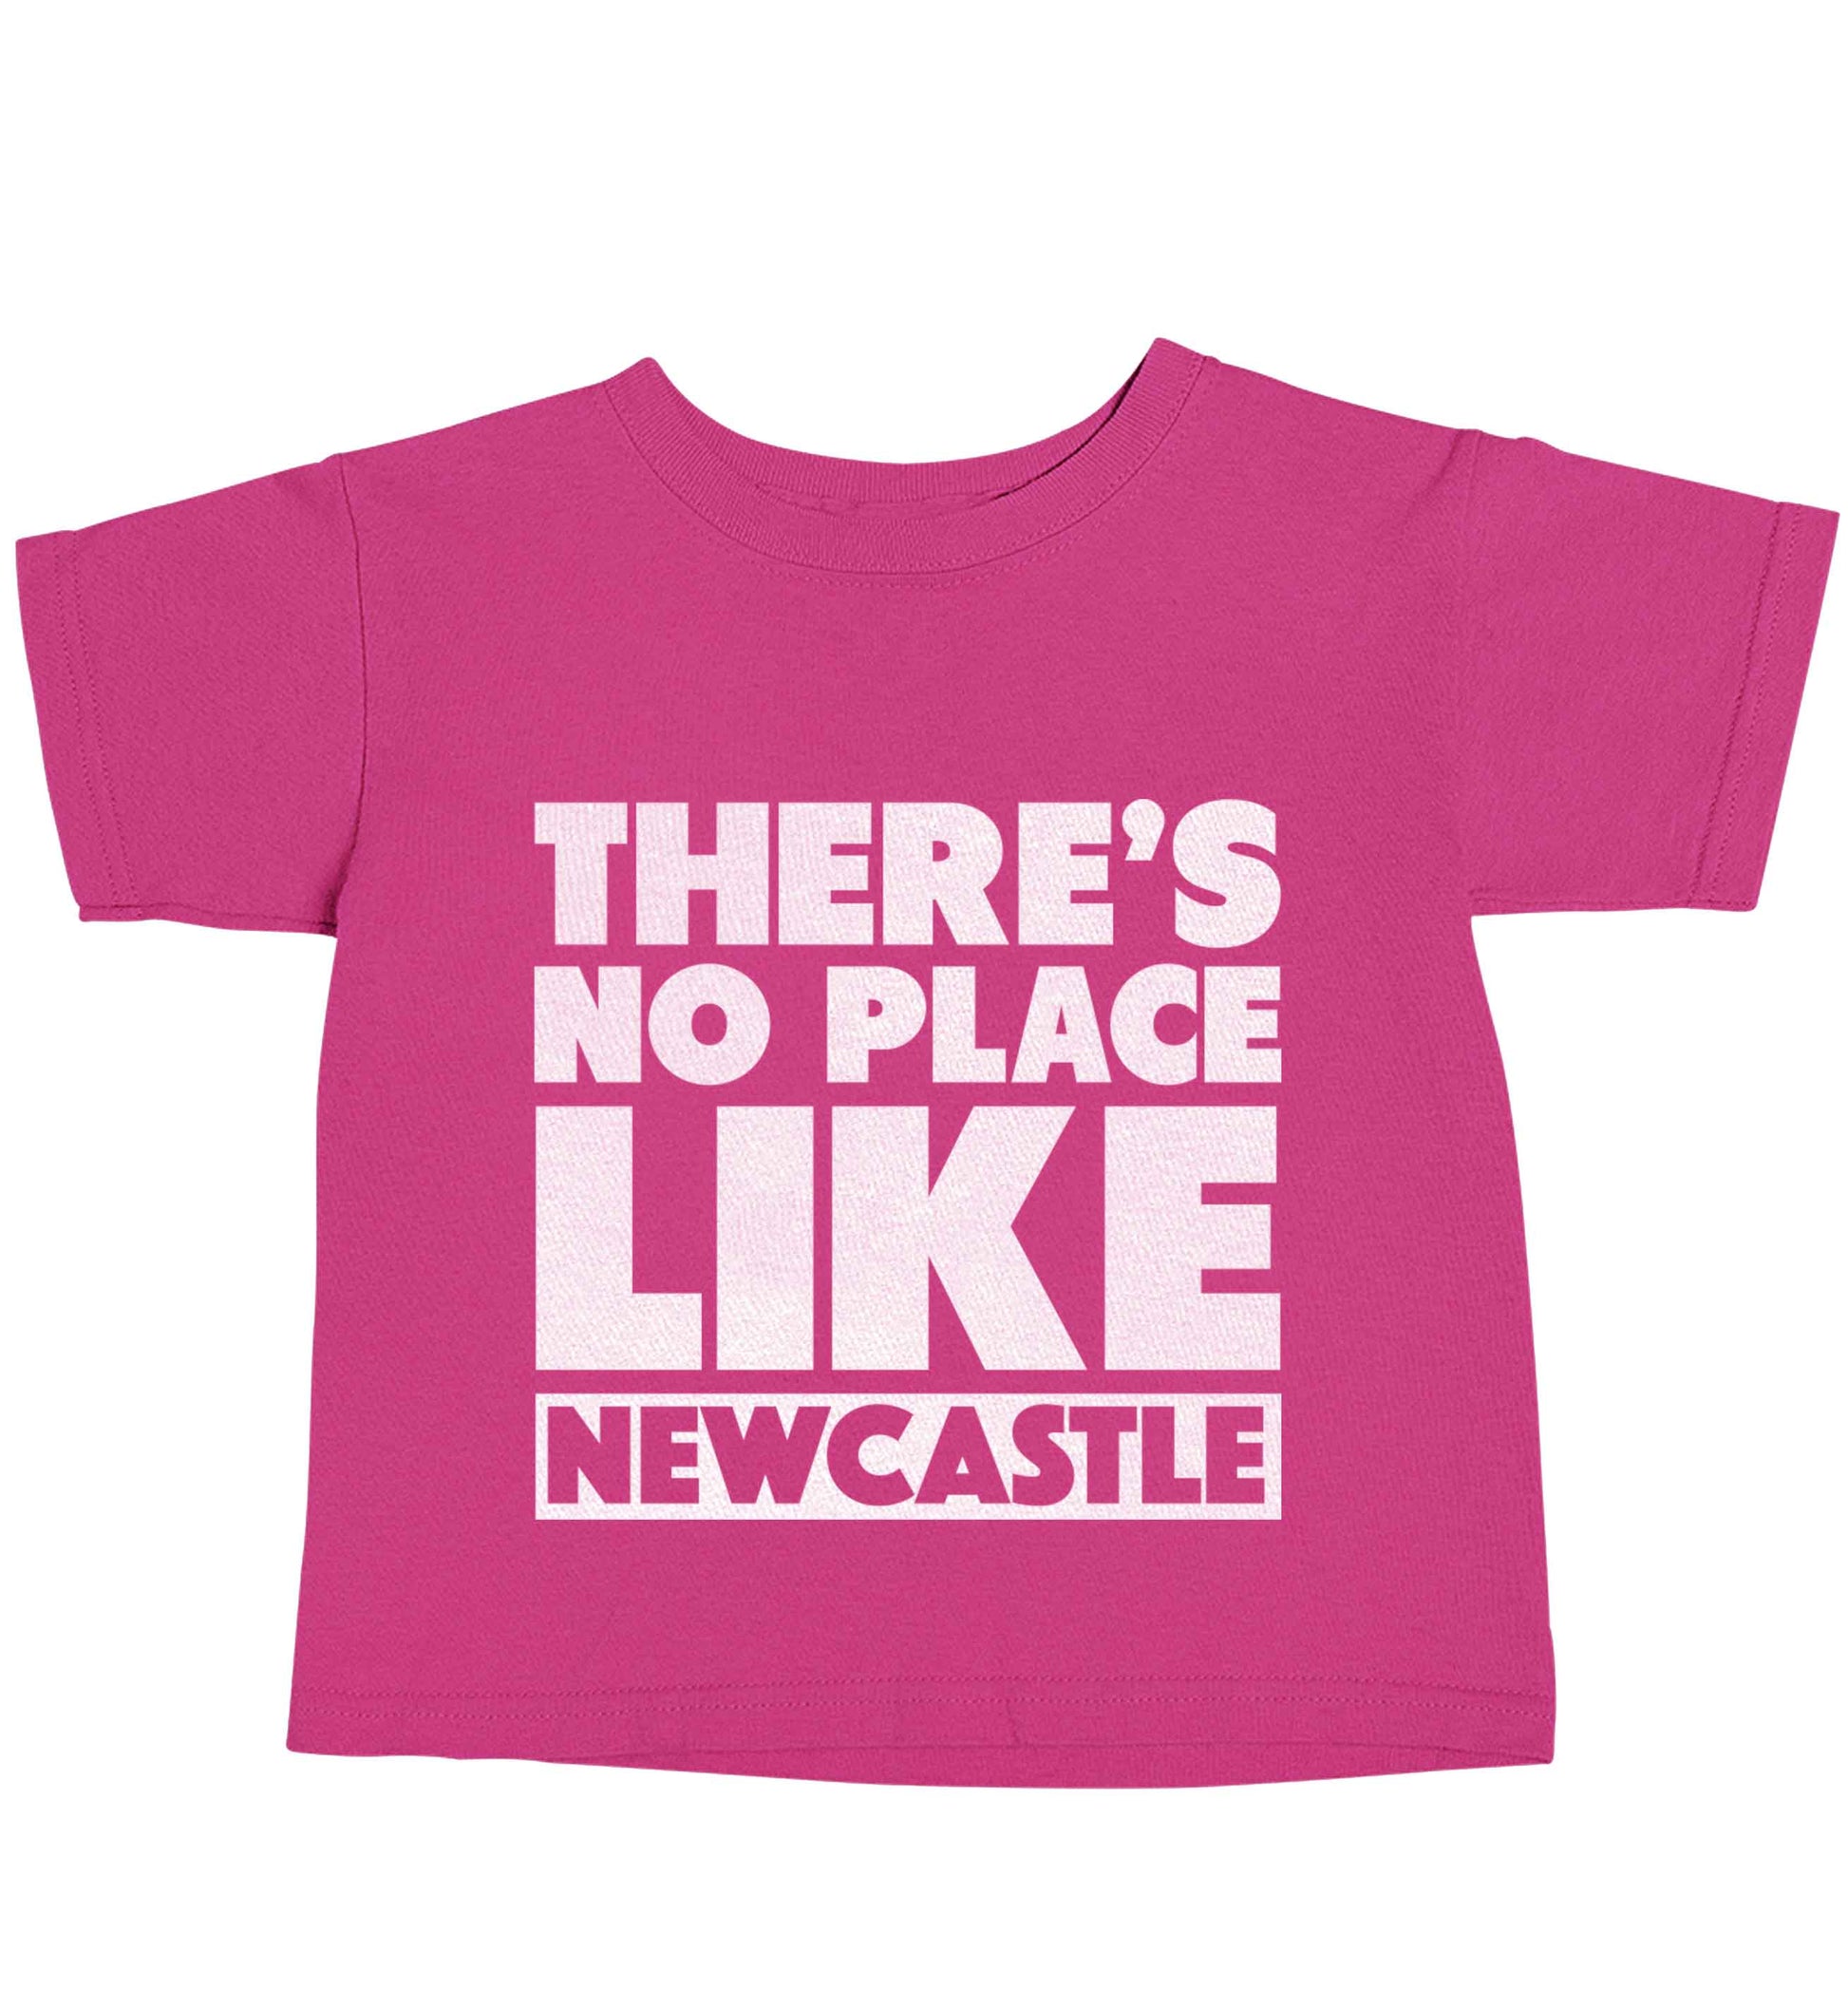 There's no place like Newcastle pink baby toddler Tshirt 2 Years